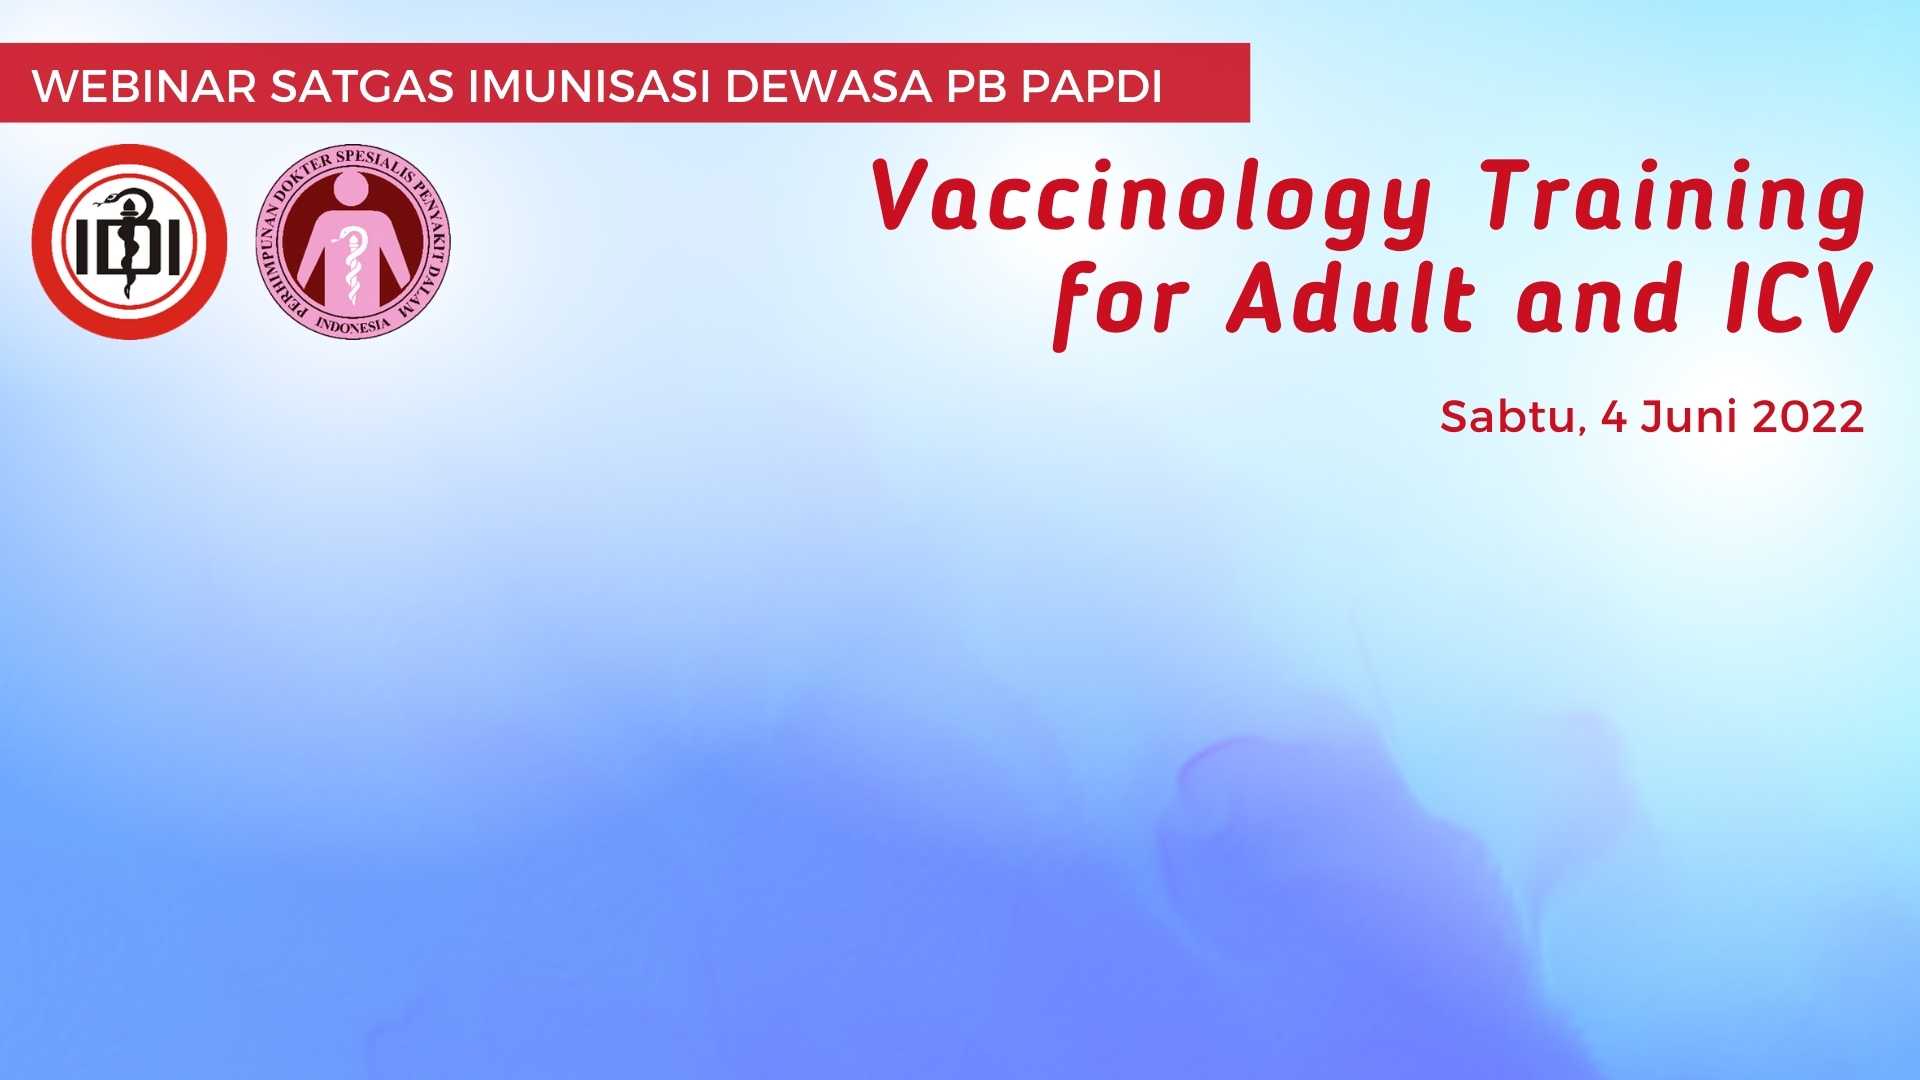 sertifikat e-Certificate Vaccinology Training for Adult and ICV 4 Juni 2022